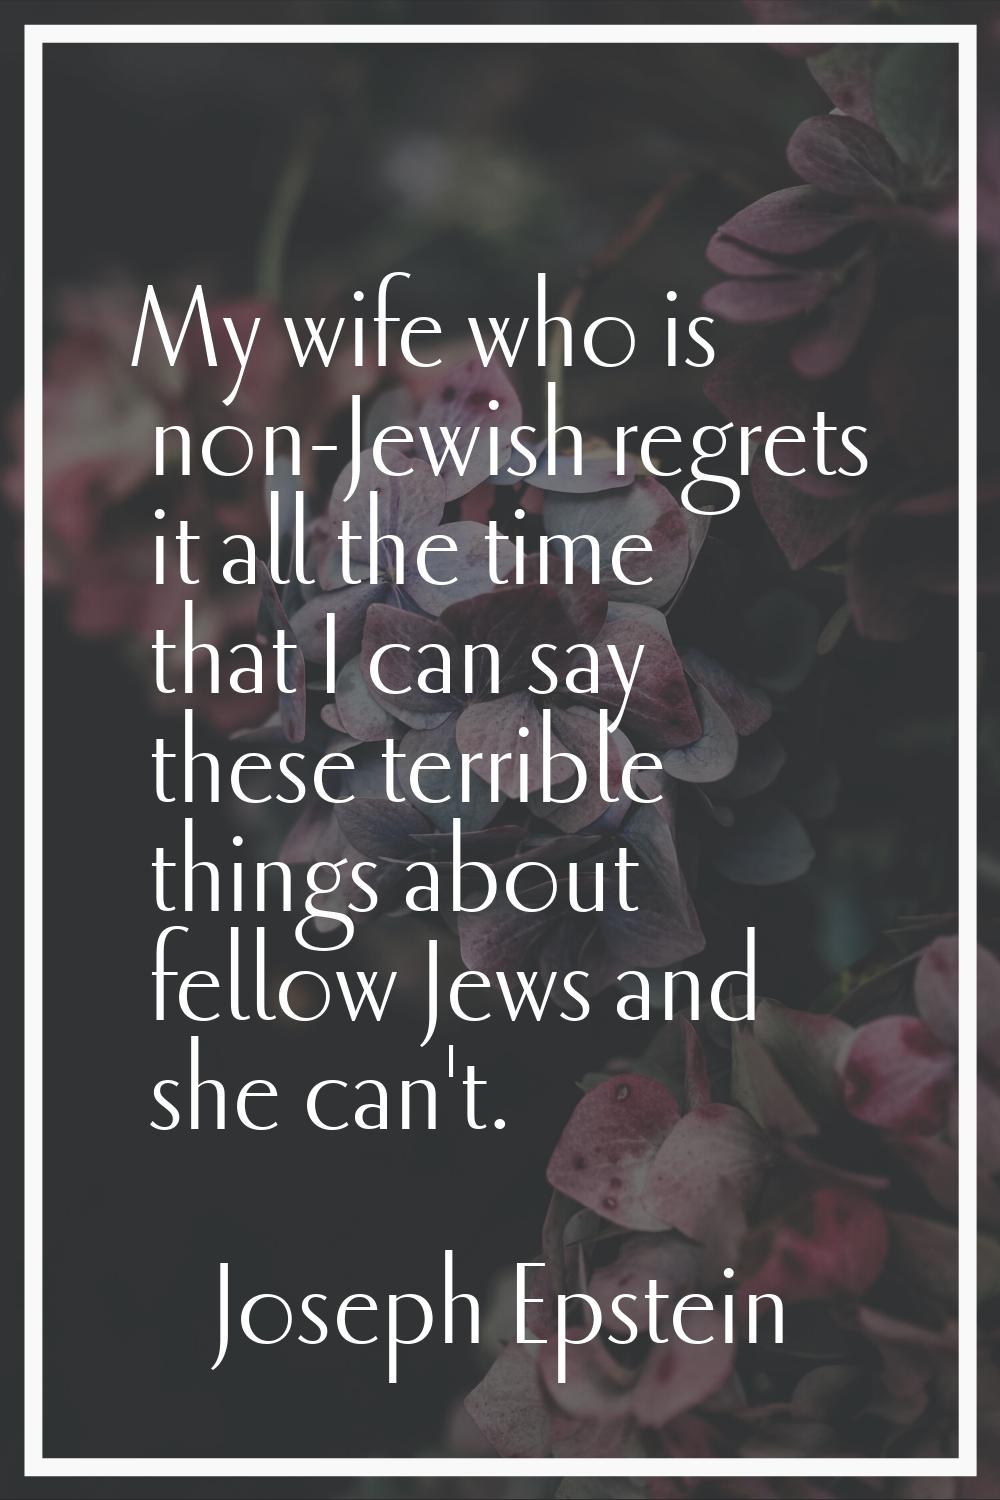 My wife who is non-Jewish regrets it all the time that I can say these terrible things about fellow